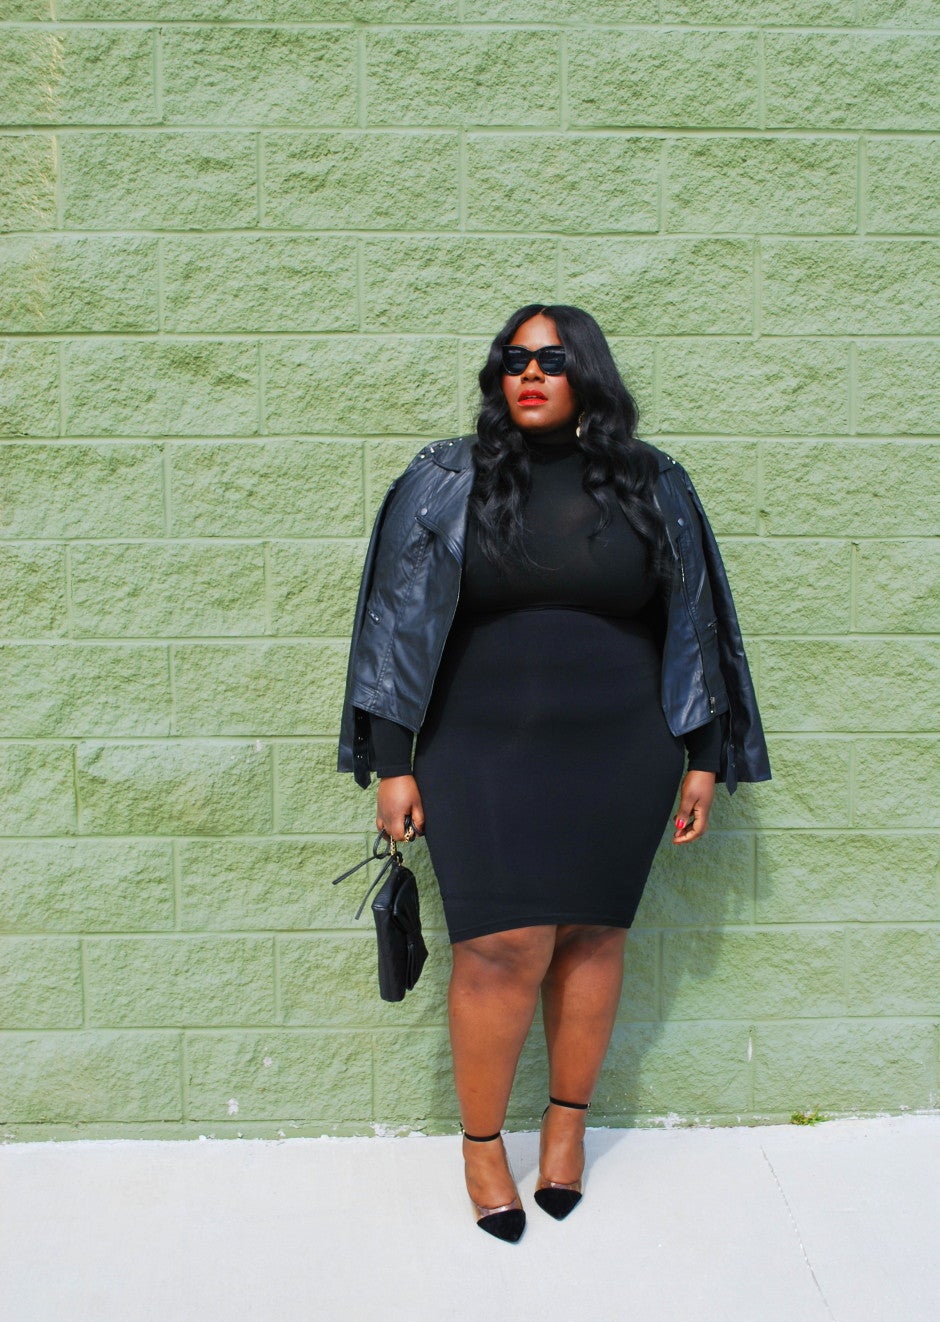 Monochromatic Muses: A Curvy Girl's Guide for Head-to-Toe Hues
